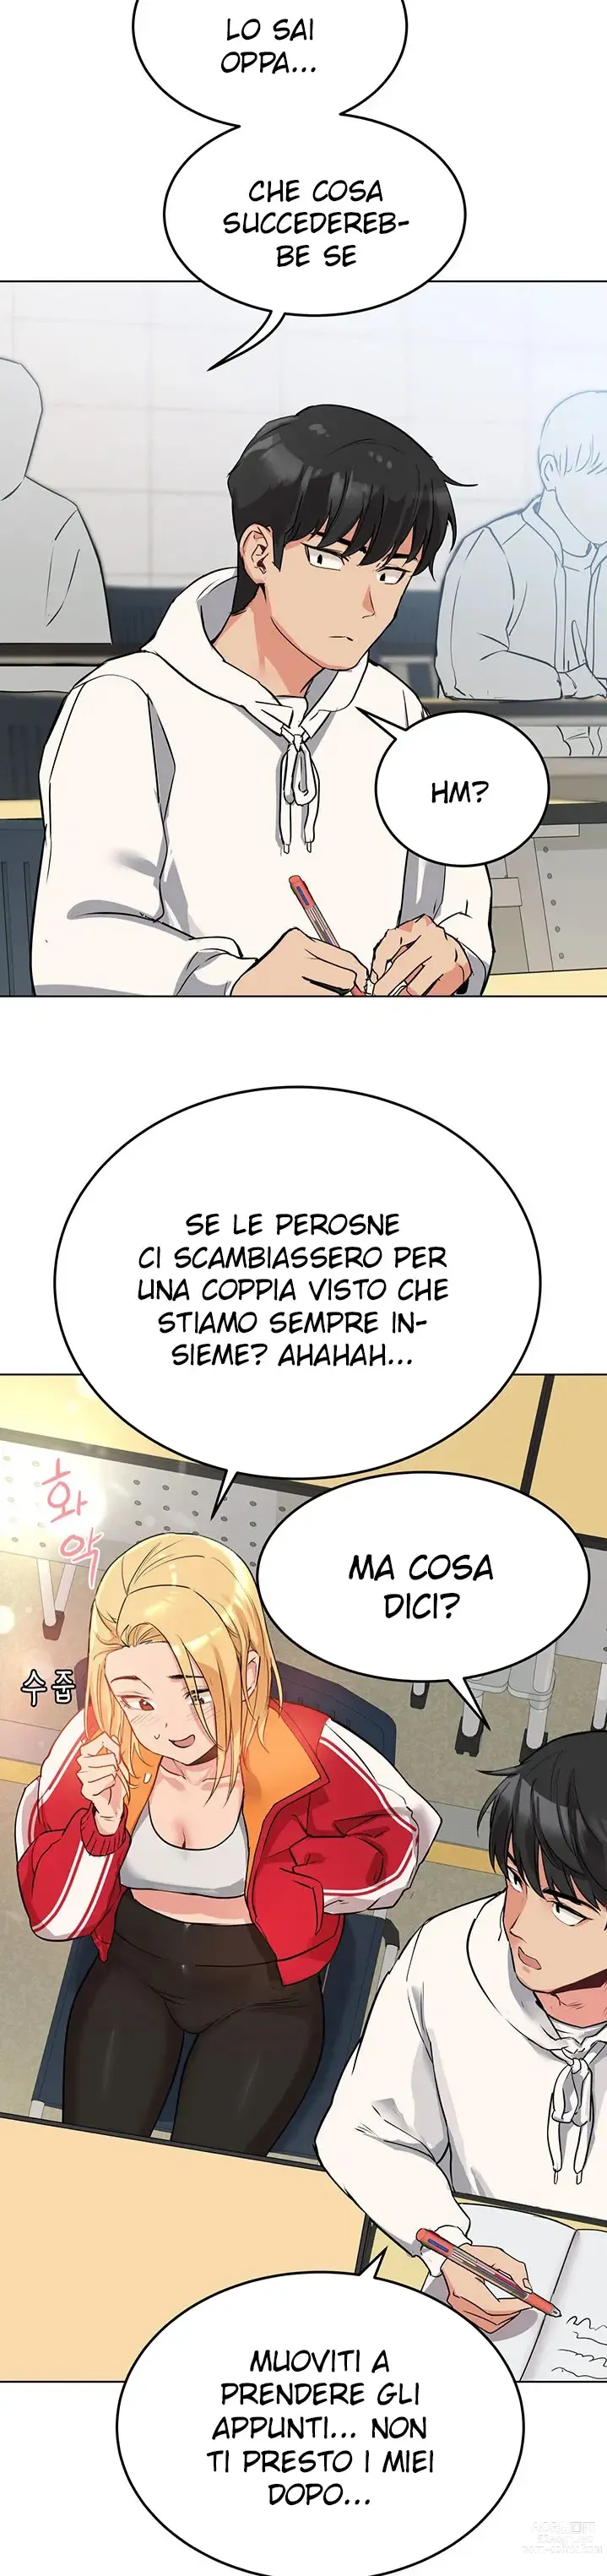 Page 31 of manga Keep It a Secret From Your Mother capitolo 02